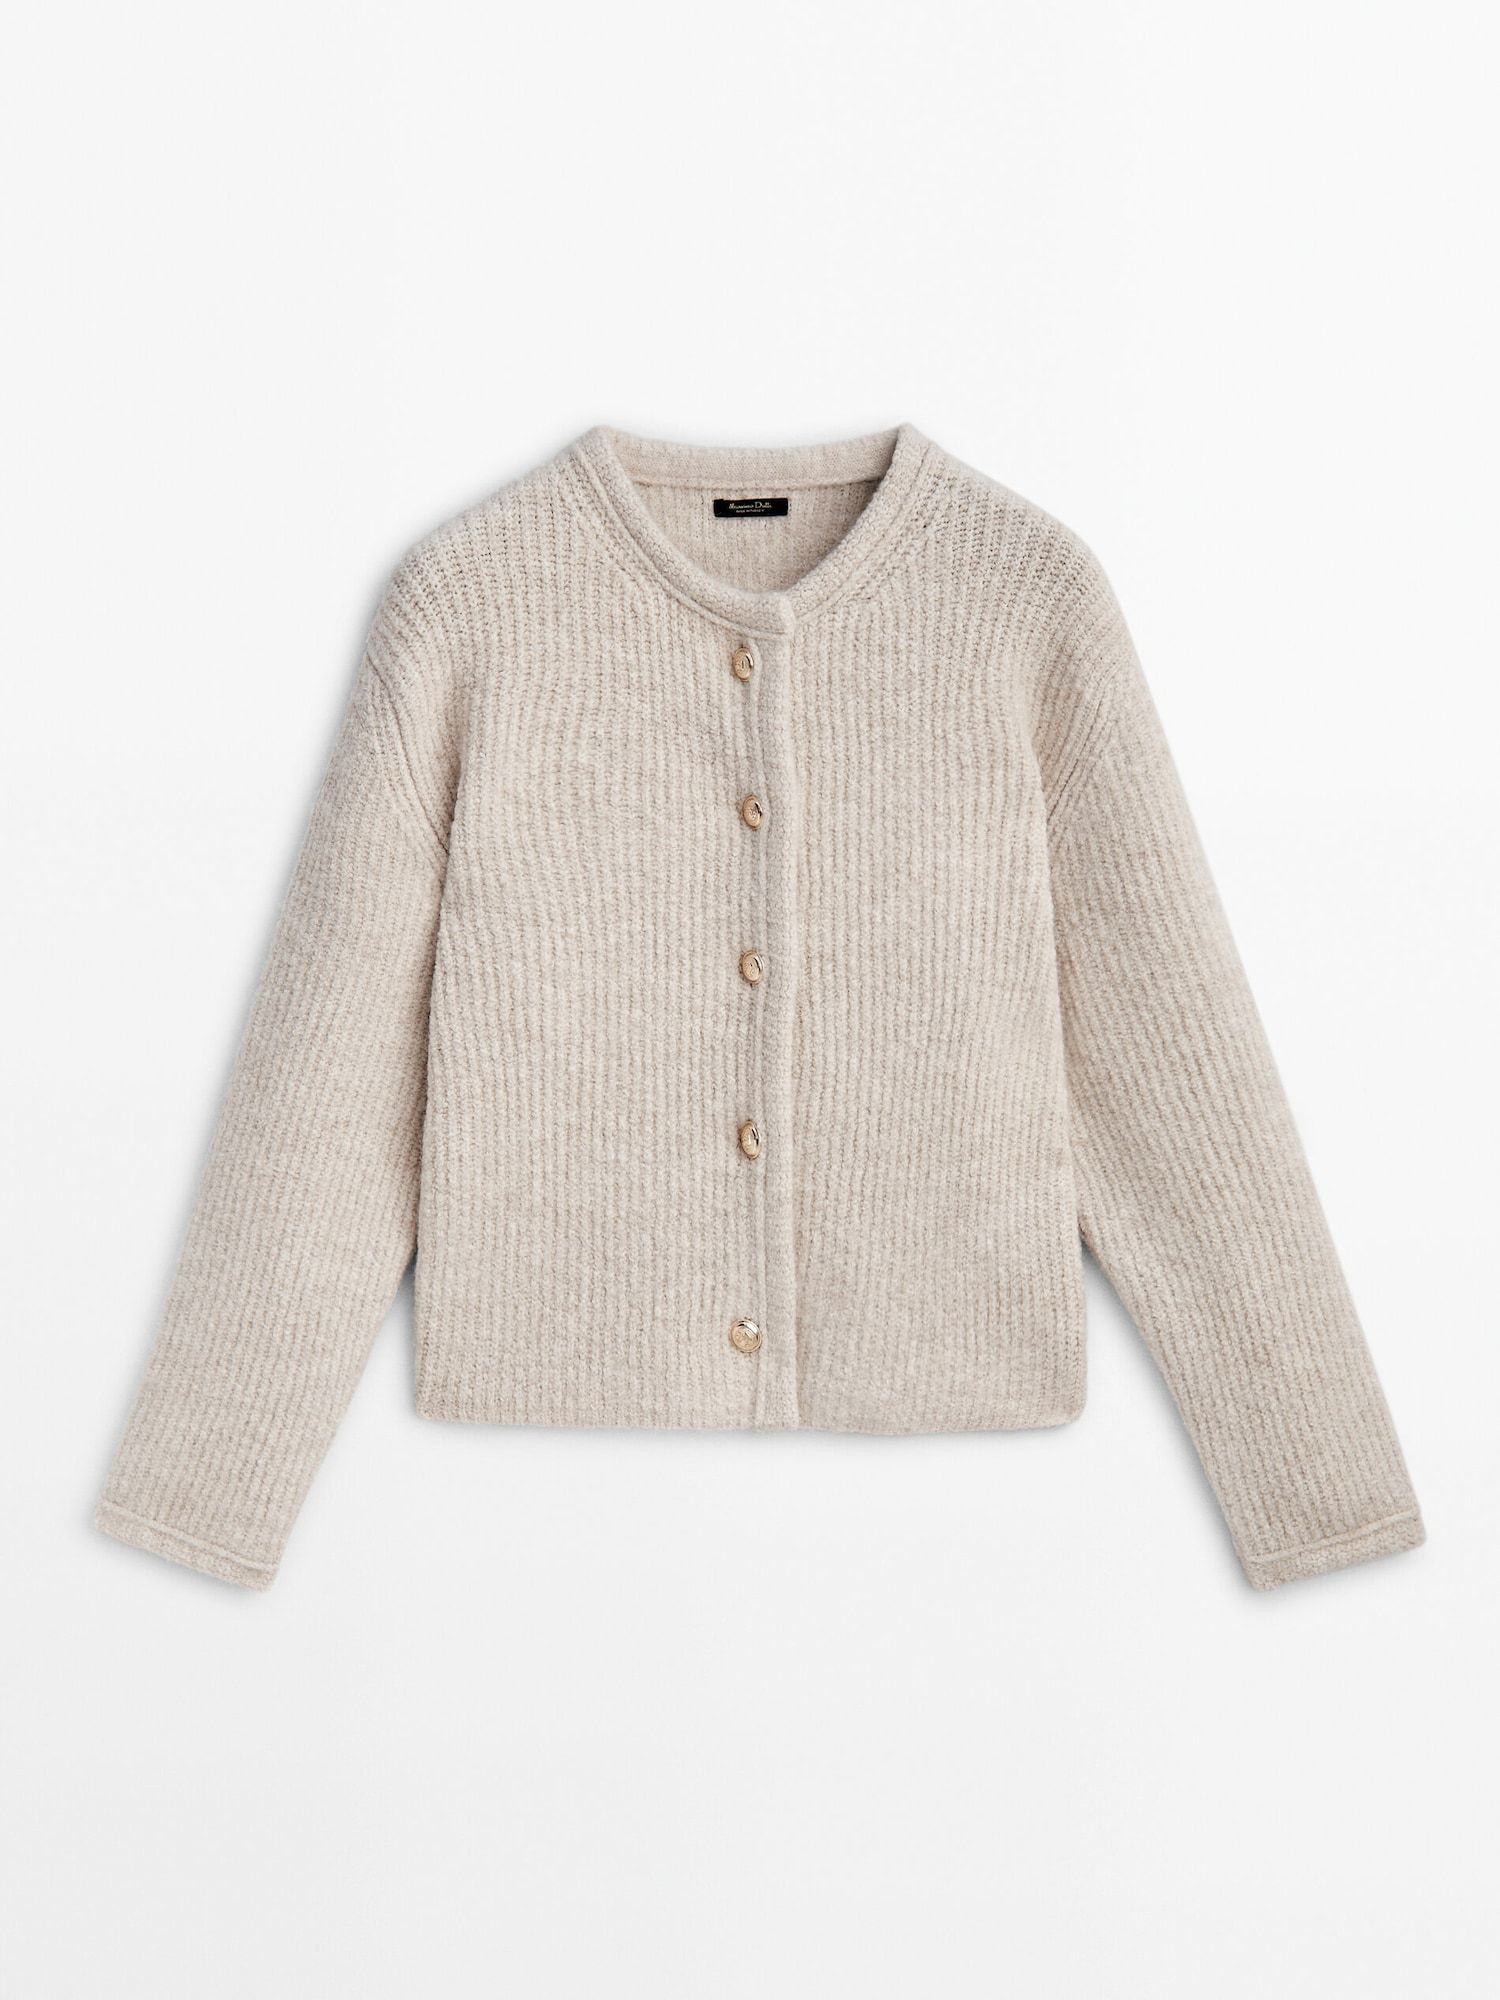 Knit cardigan with button detail at the back | Massimo Dutti UK